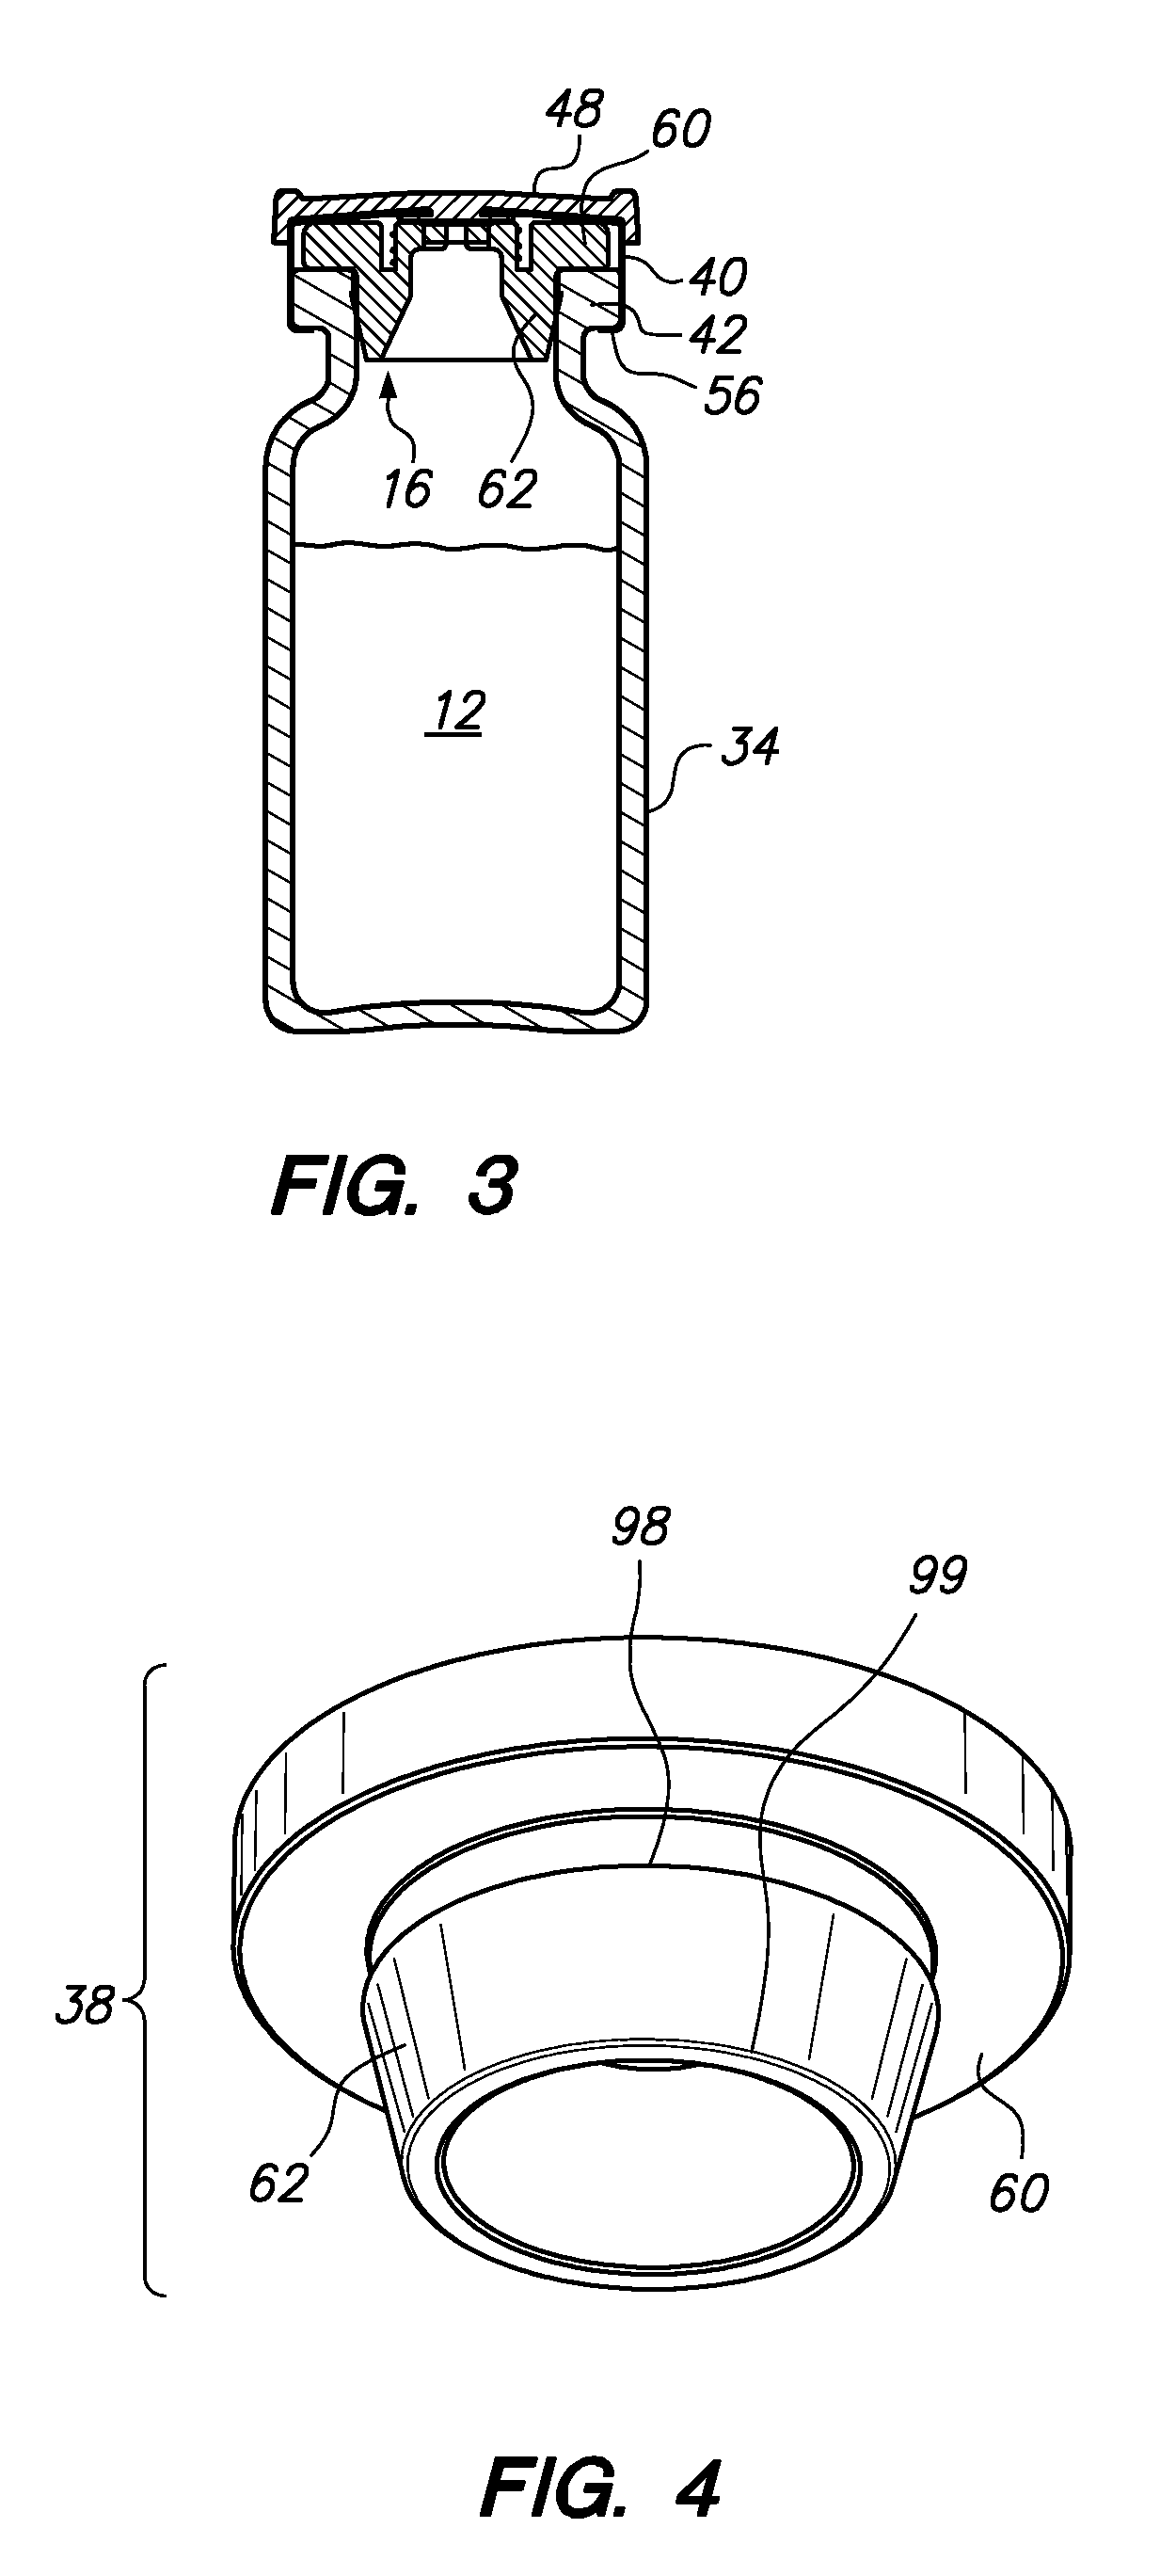 Coupling system to transfer material between containers